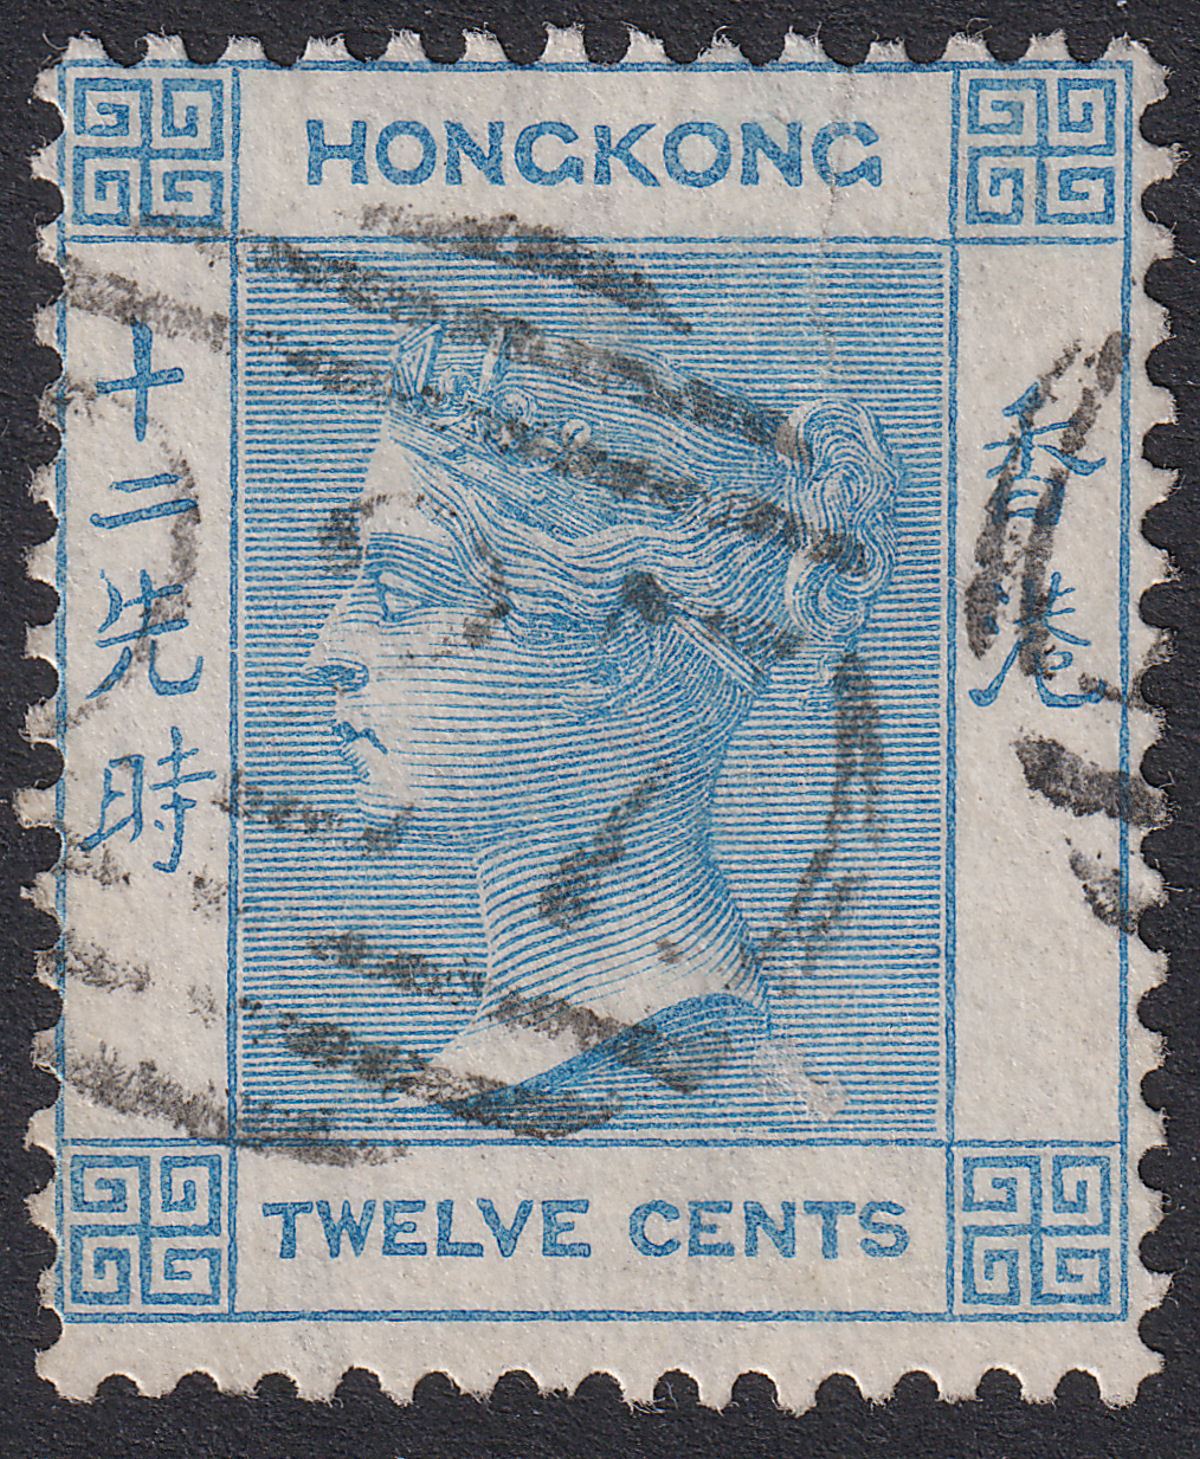 Hong Kong 1863 QV 12c Blue Used with D27 Postmark Amoy SG Z12 cat £25